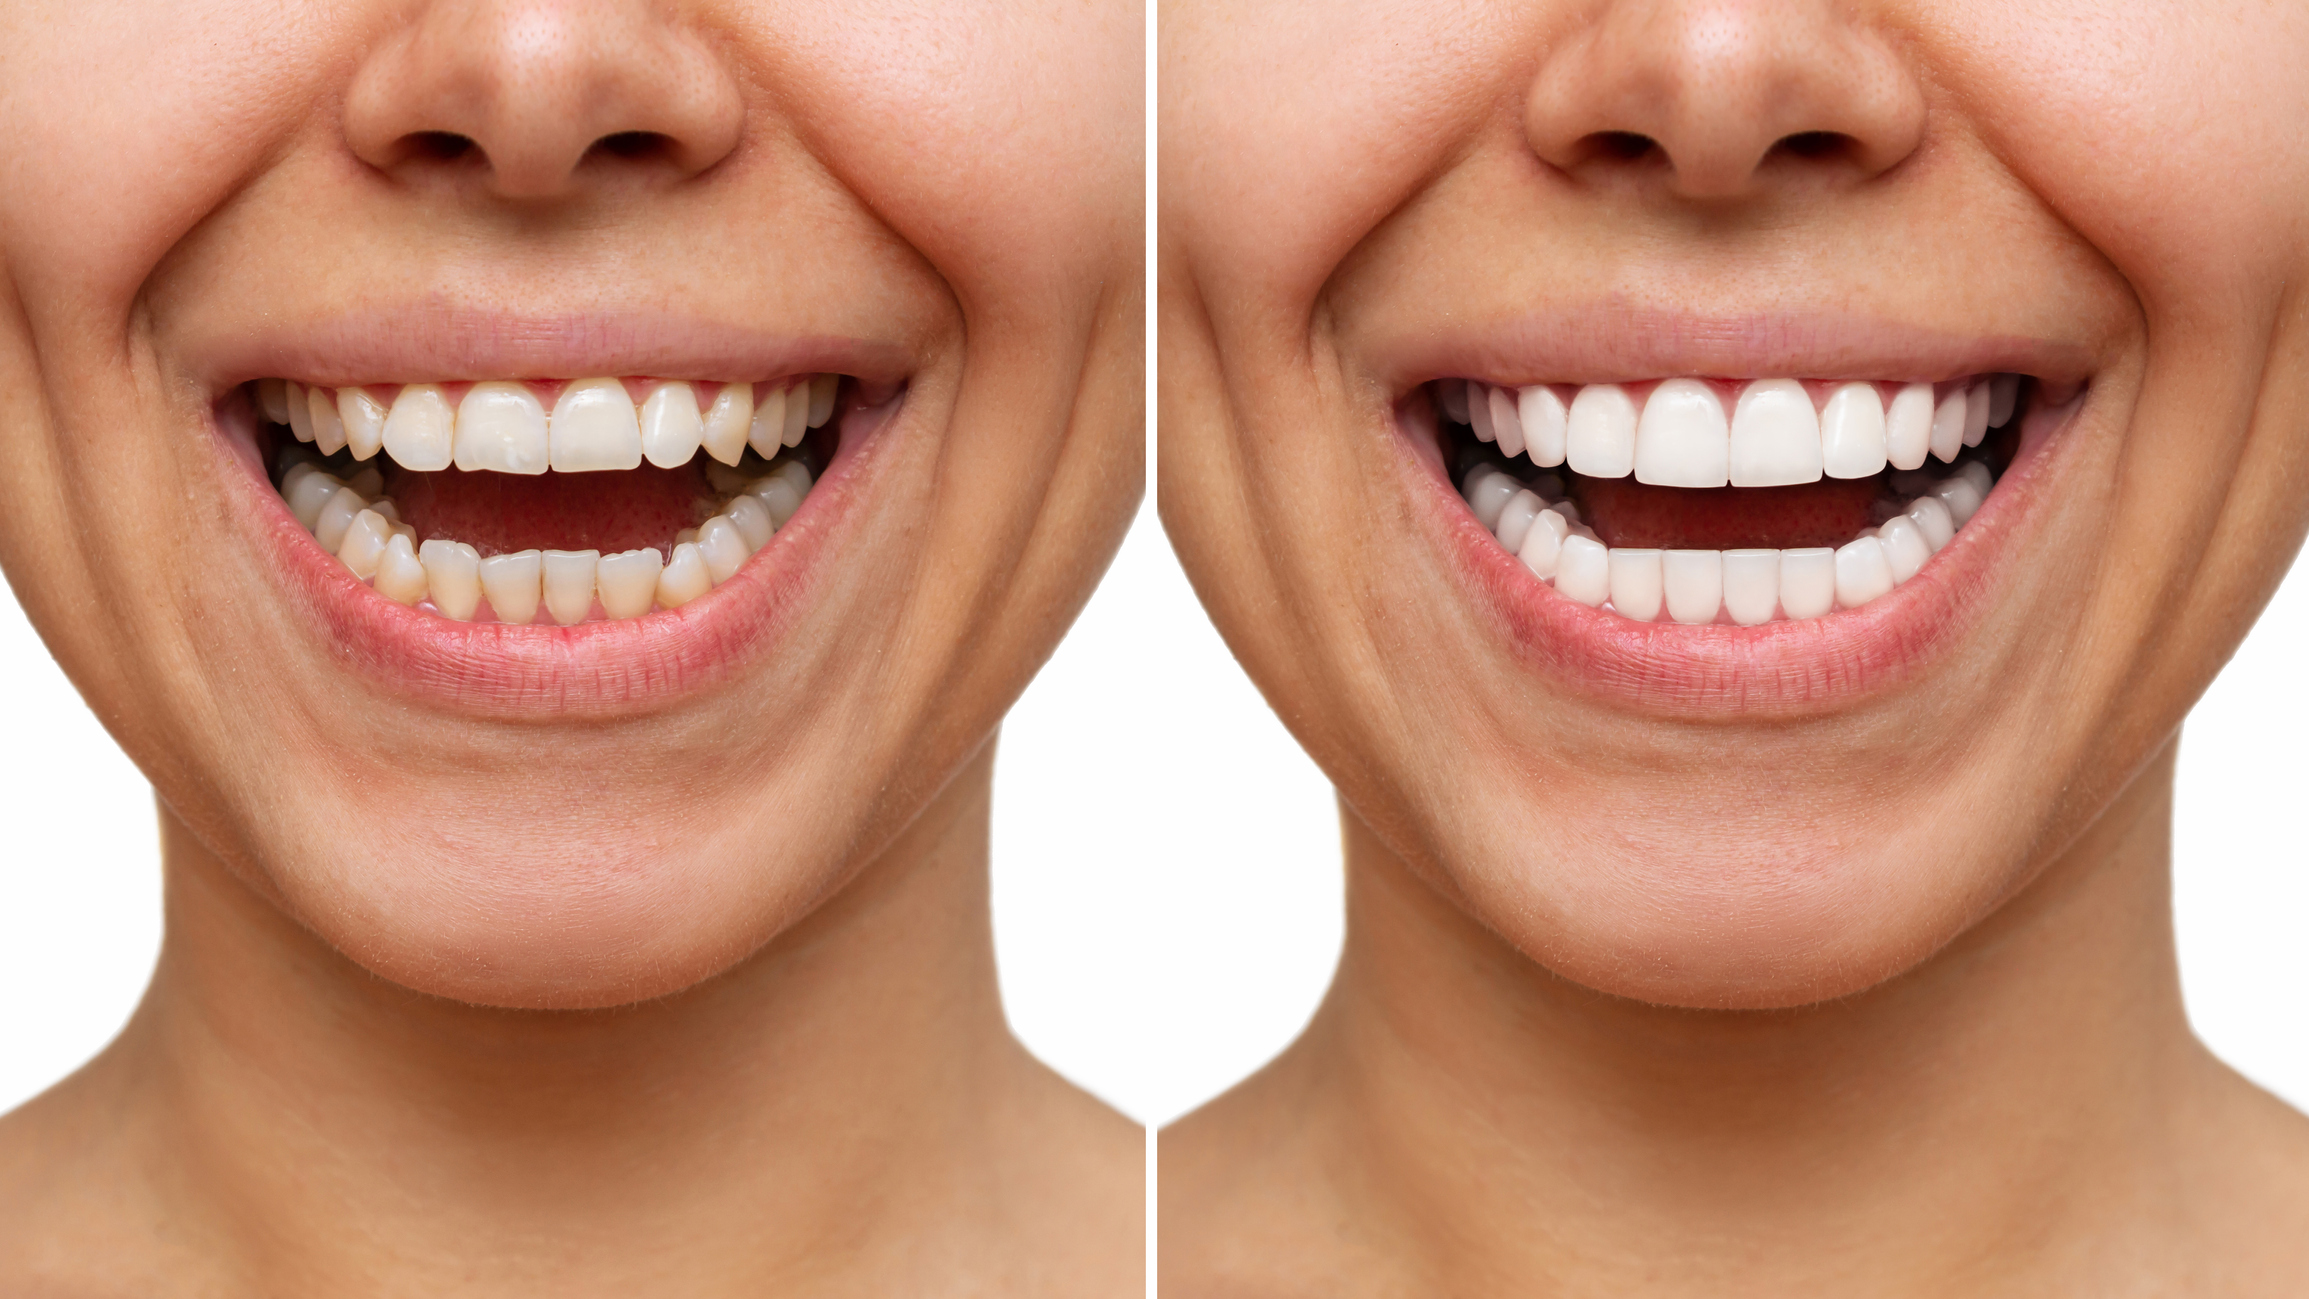 Veneers: What Are They? Are They Right For You?